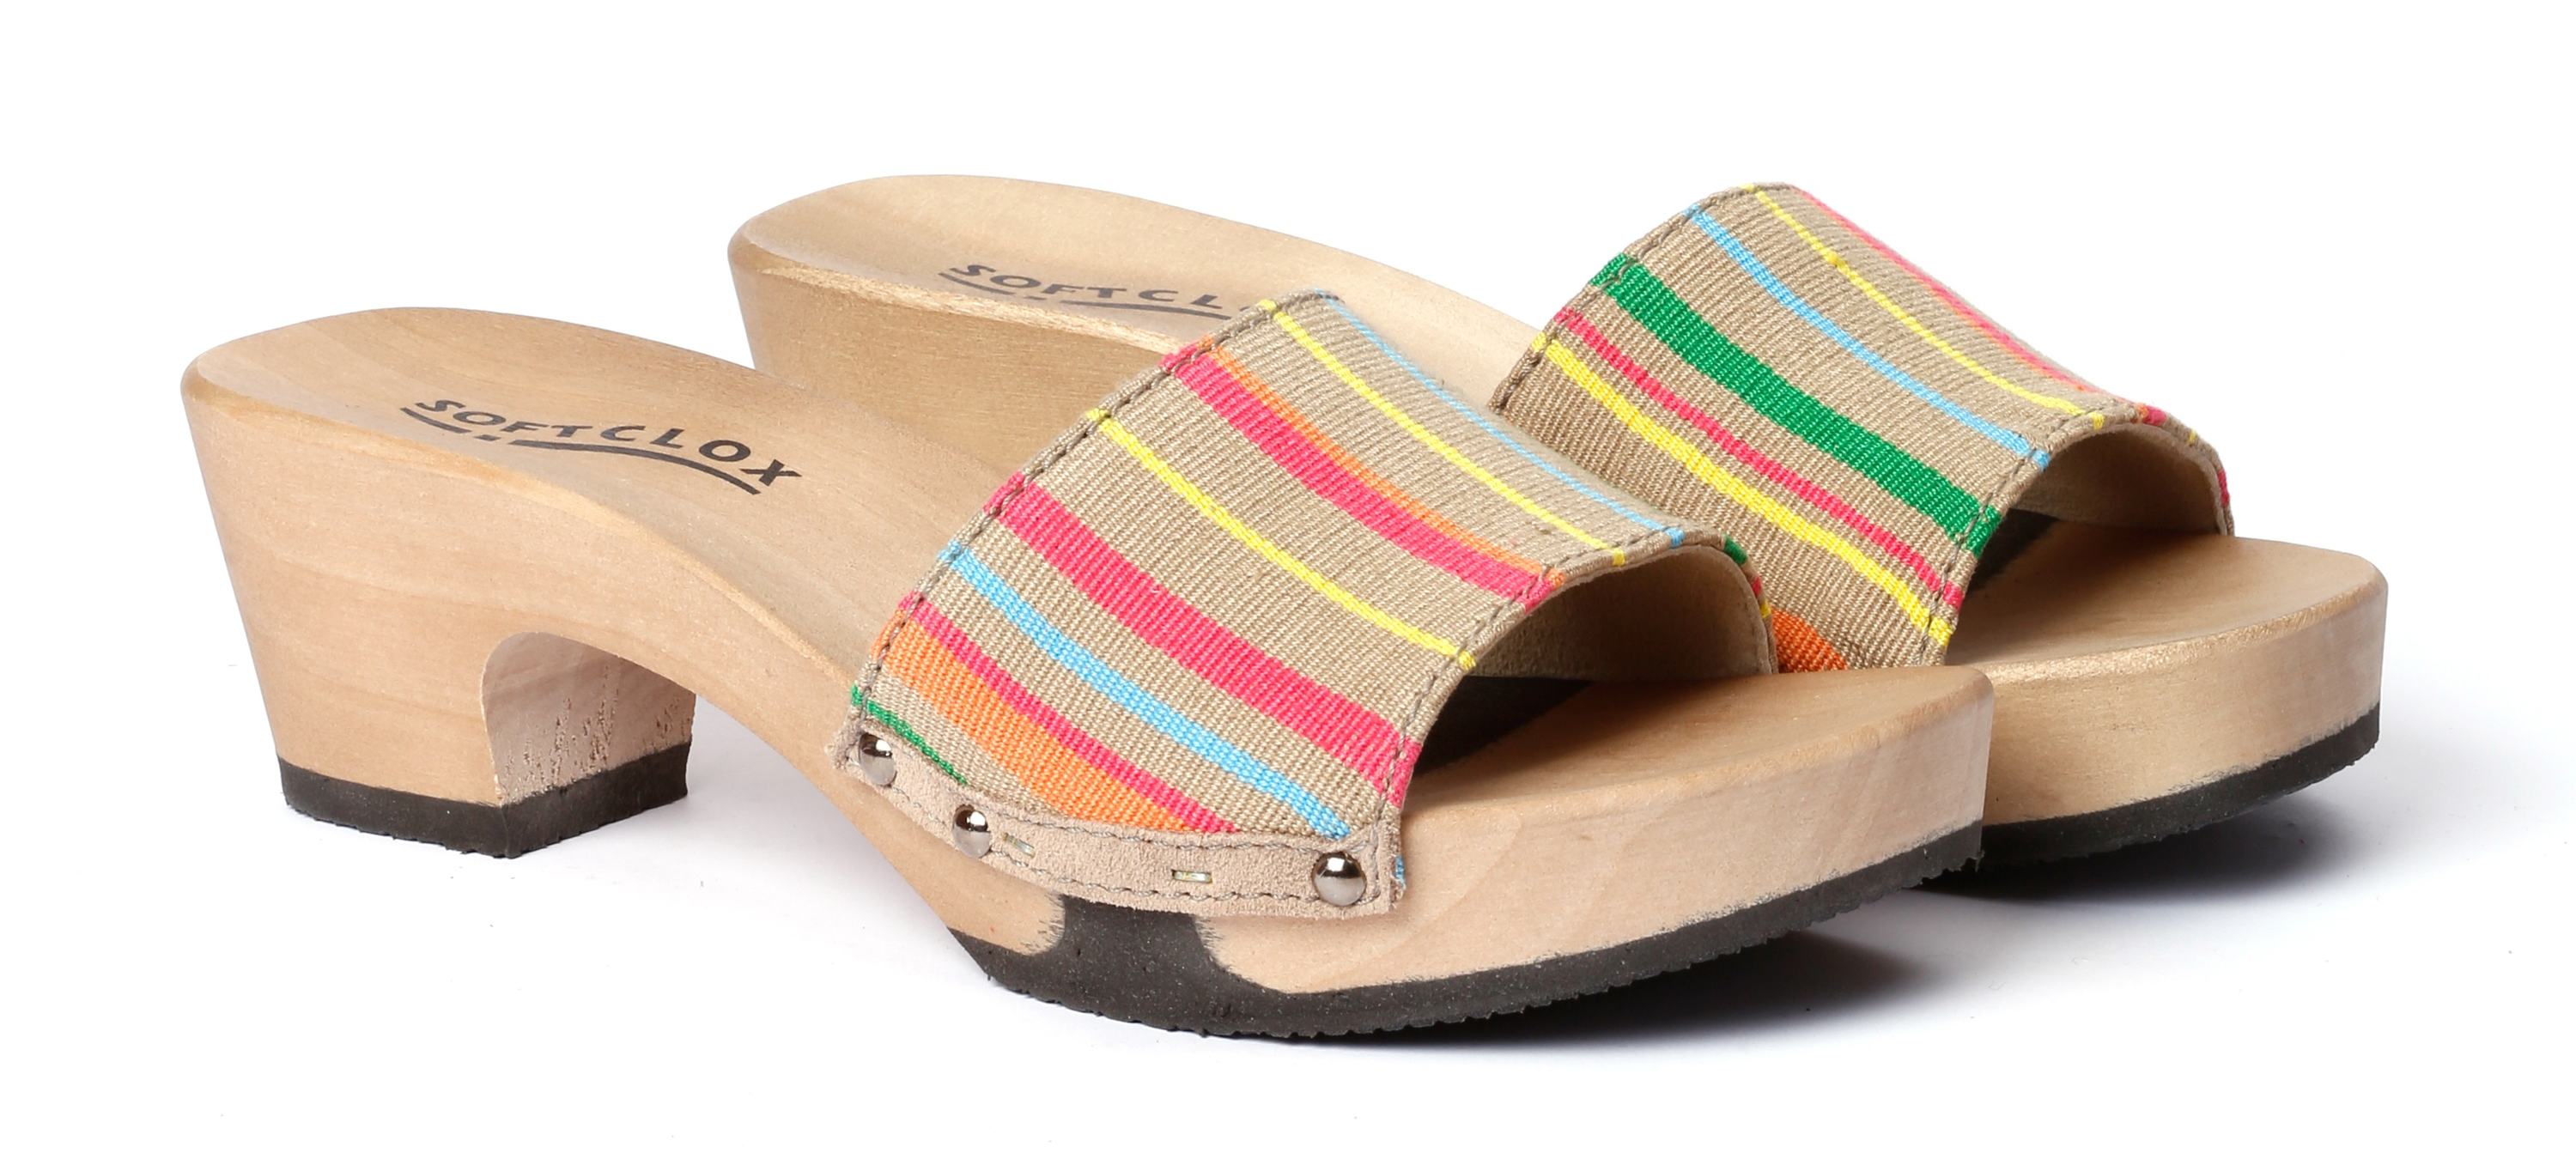 Shoe mule, fabric handwoven with suede lining multicolored by Softclox